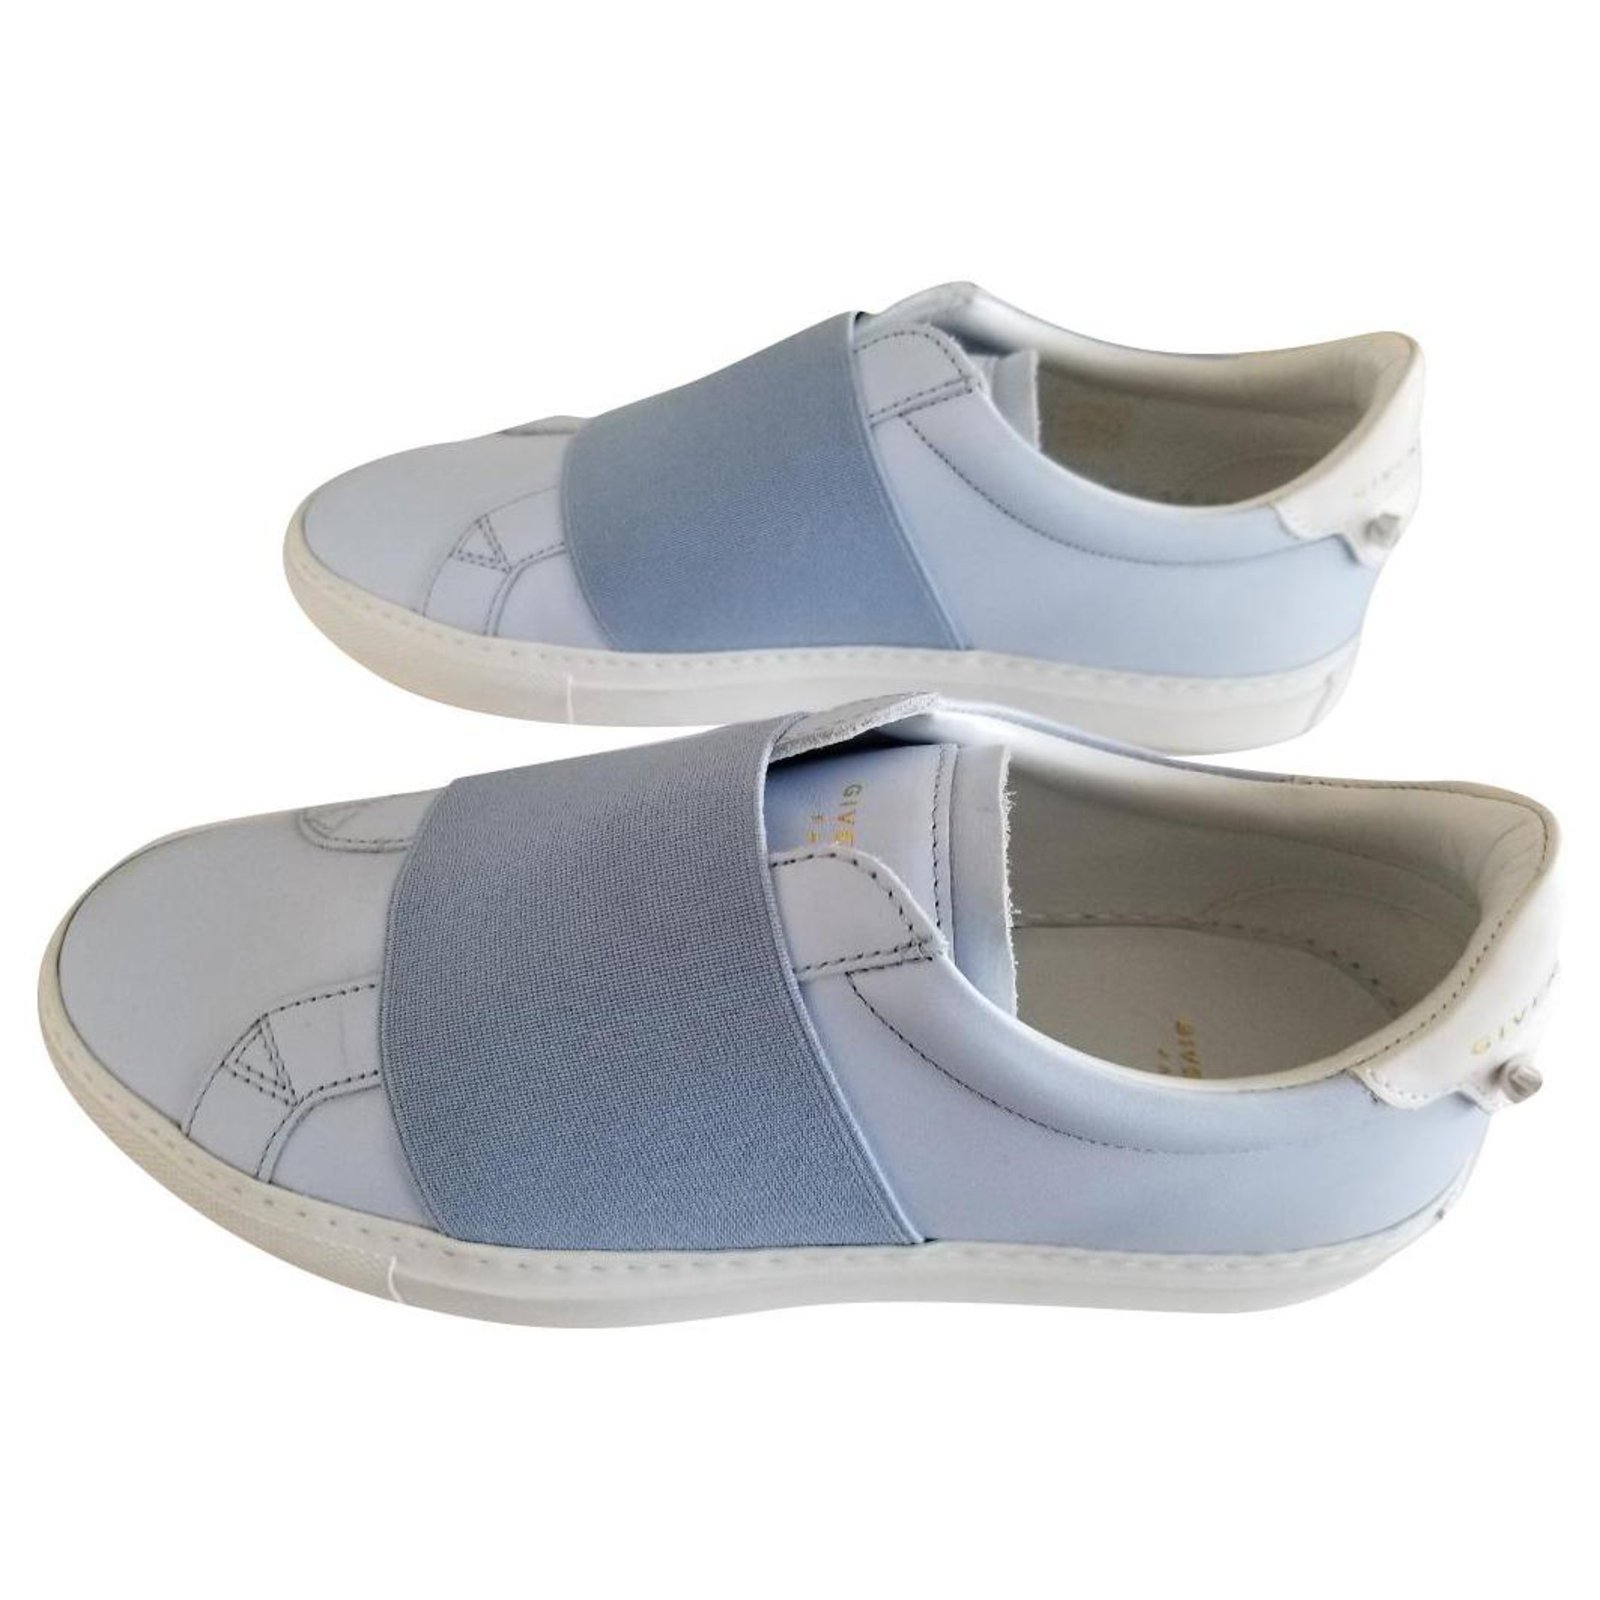 Givenchy Sneakers Light blue Leather  - Joli Closet